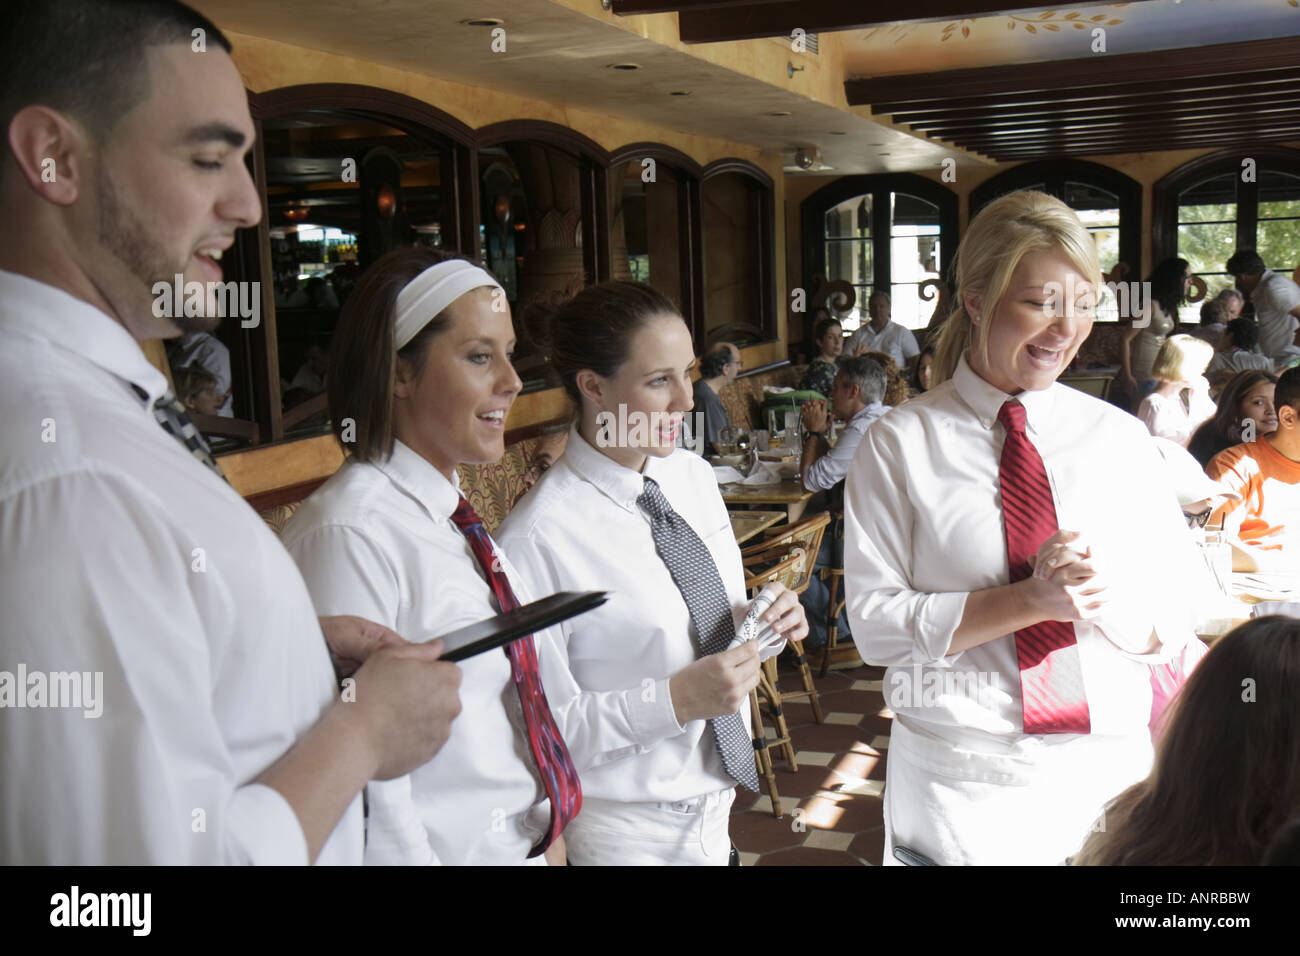 Miami Florida,Coconut Grove,CocoWalk,Cheesecake Factory,restaurant restaurants food dining cafe cafes,waiter waiters server employee employees worker Stock Photo